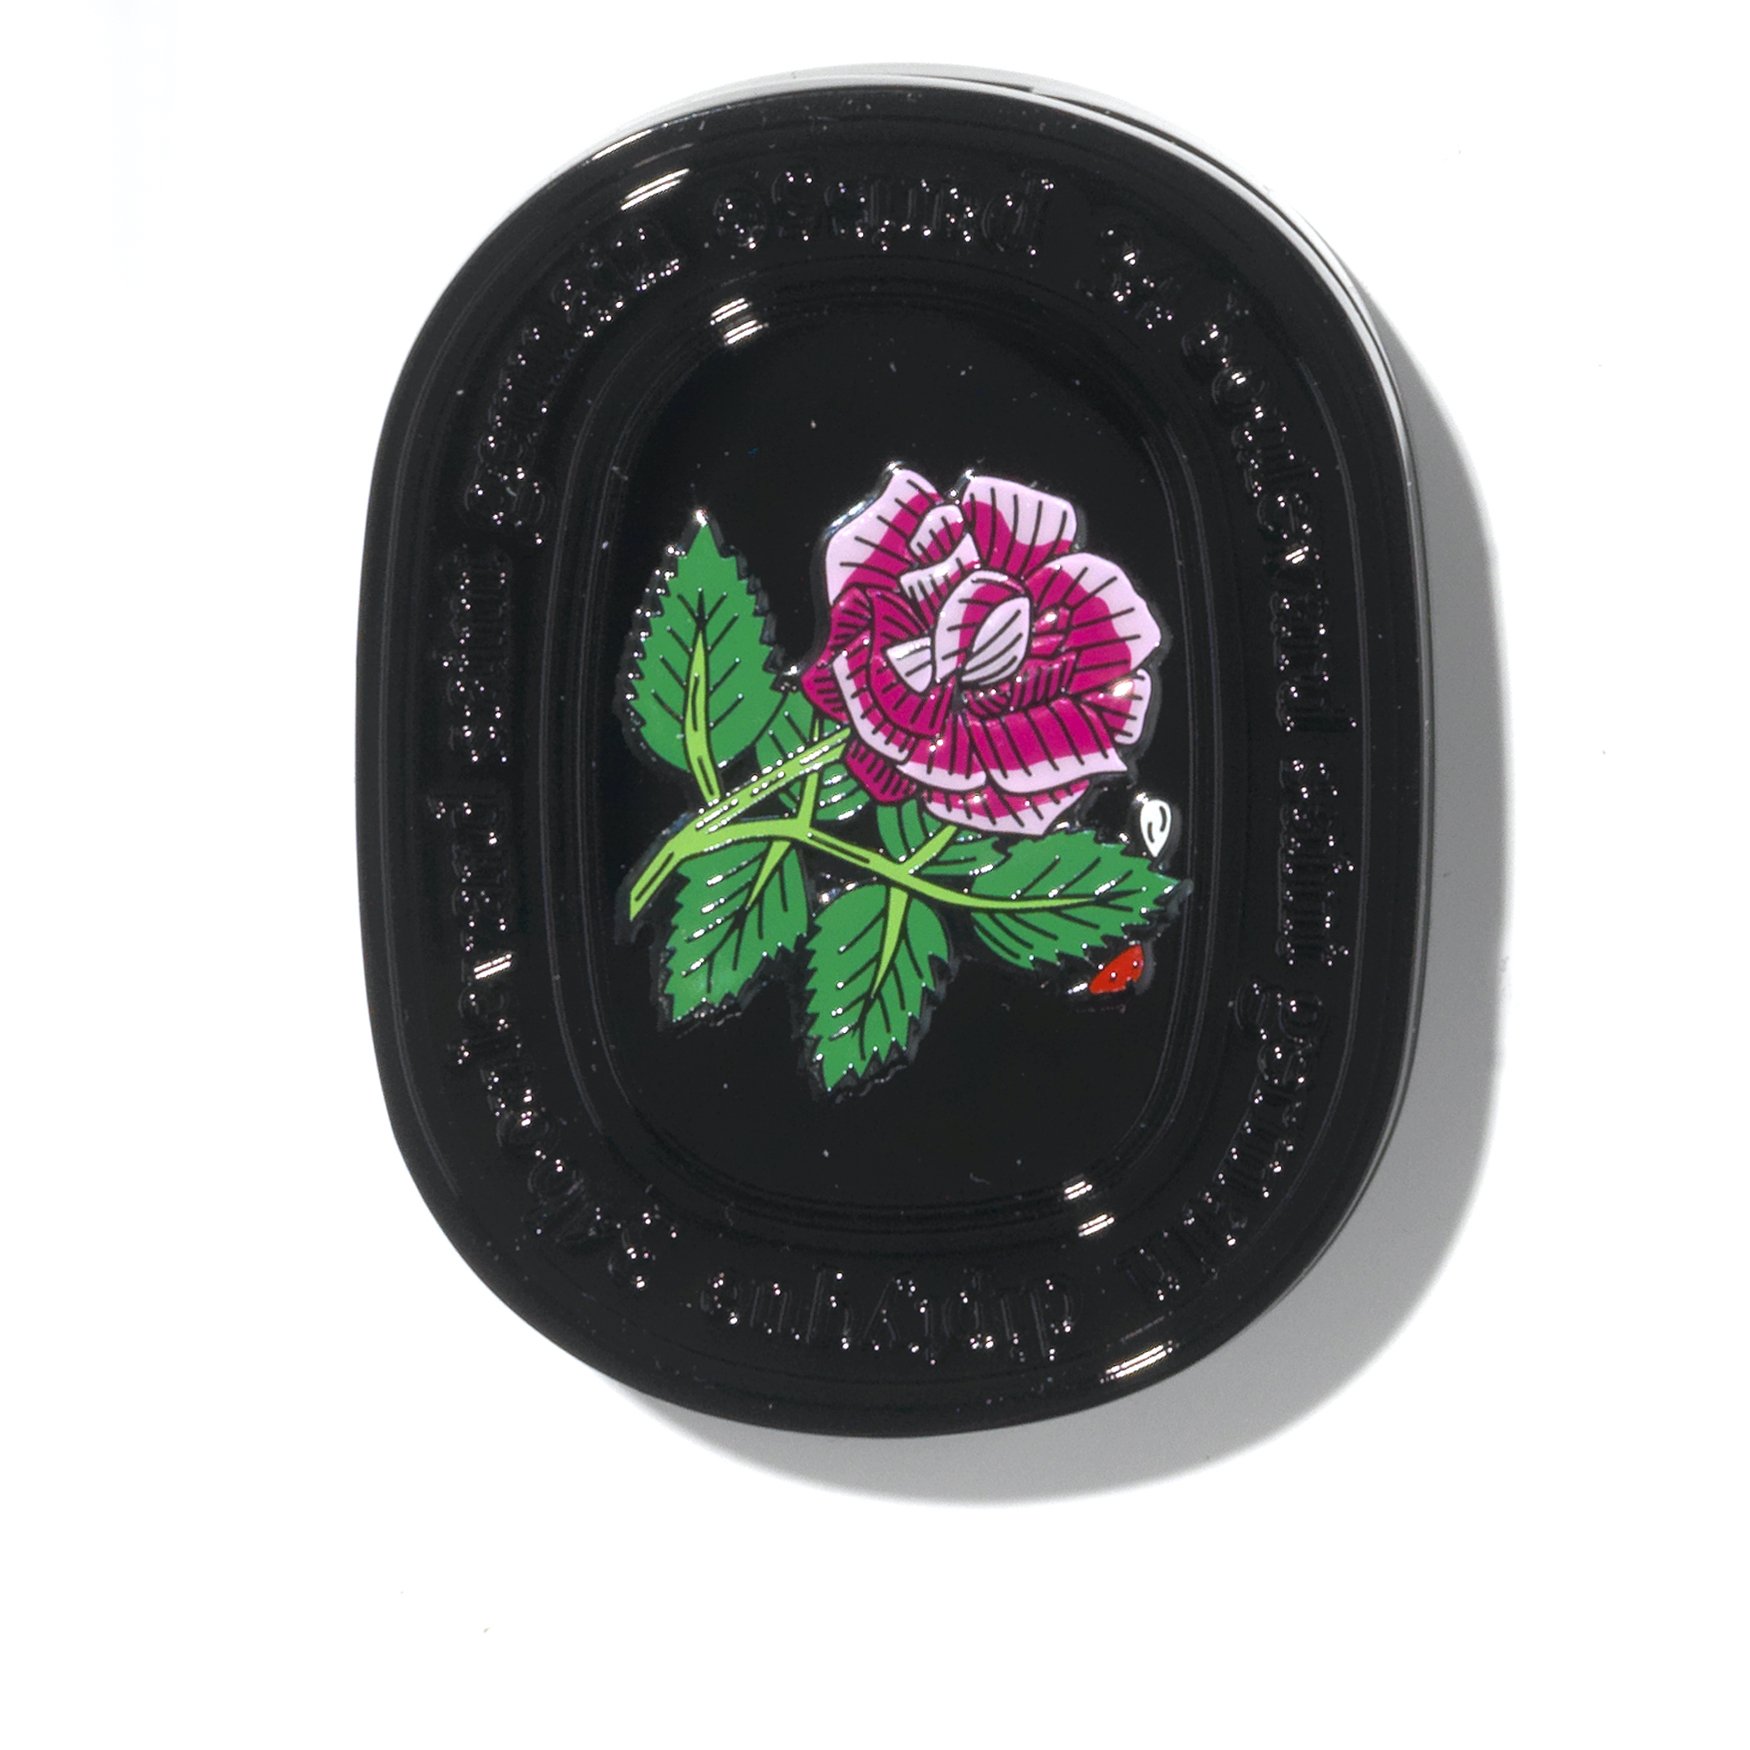 ie 20.DIPTYQUE Solid Perfume Rose €52, 